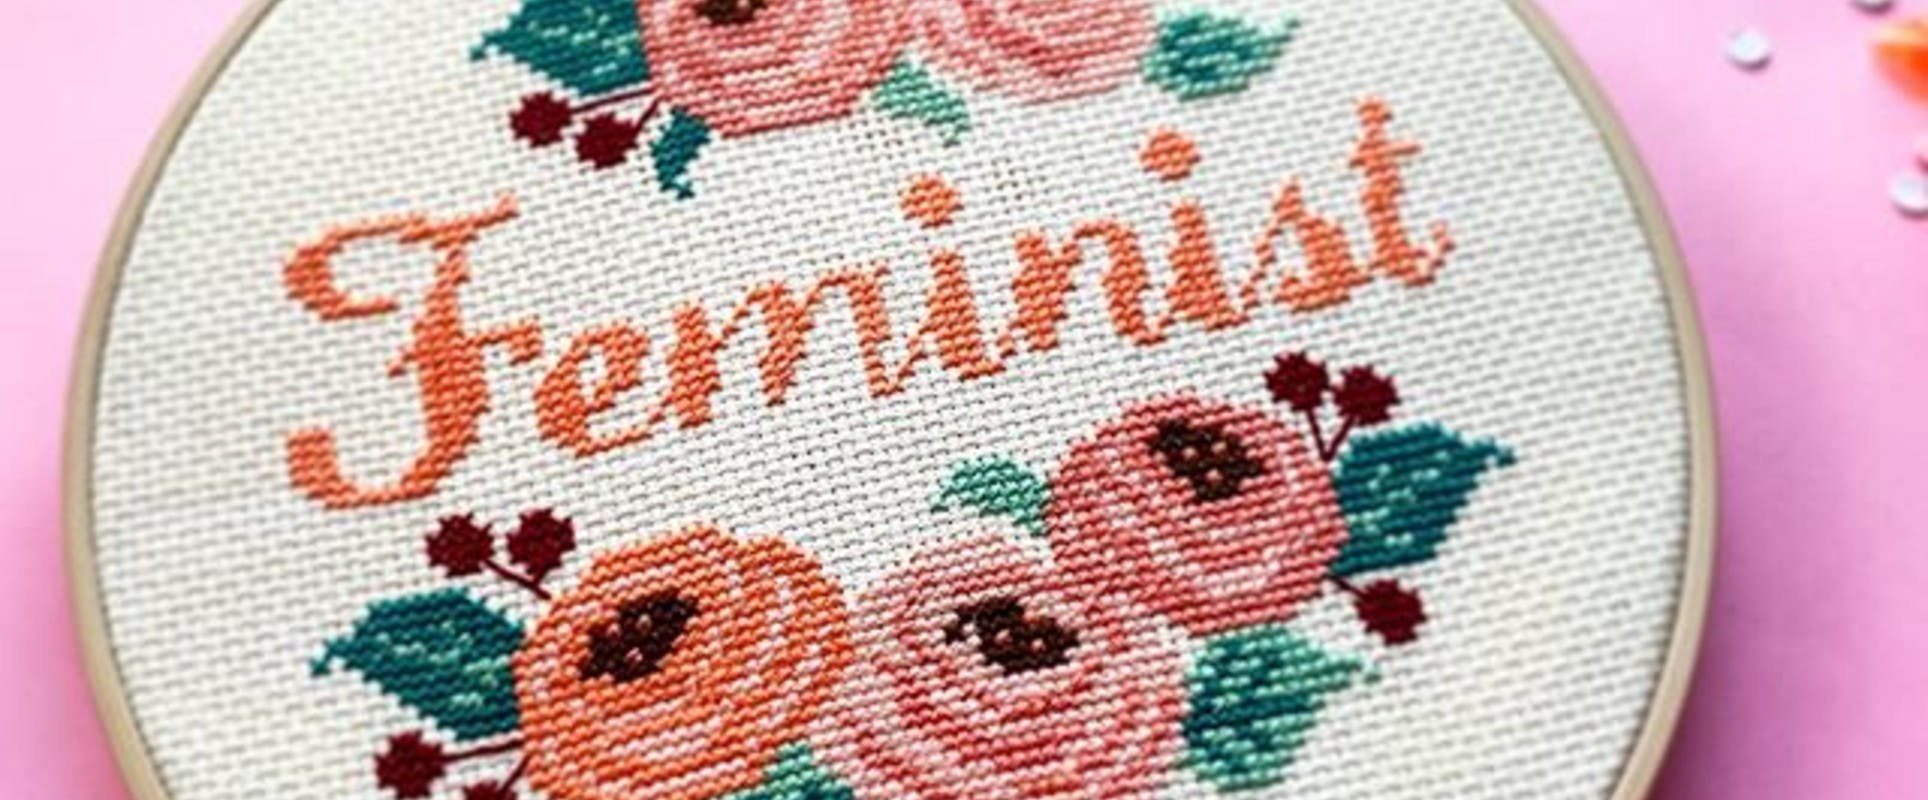 Must-Have Beginner Cross Stitch Supplies You Can't Live Without